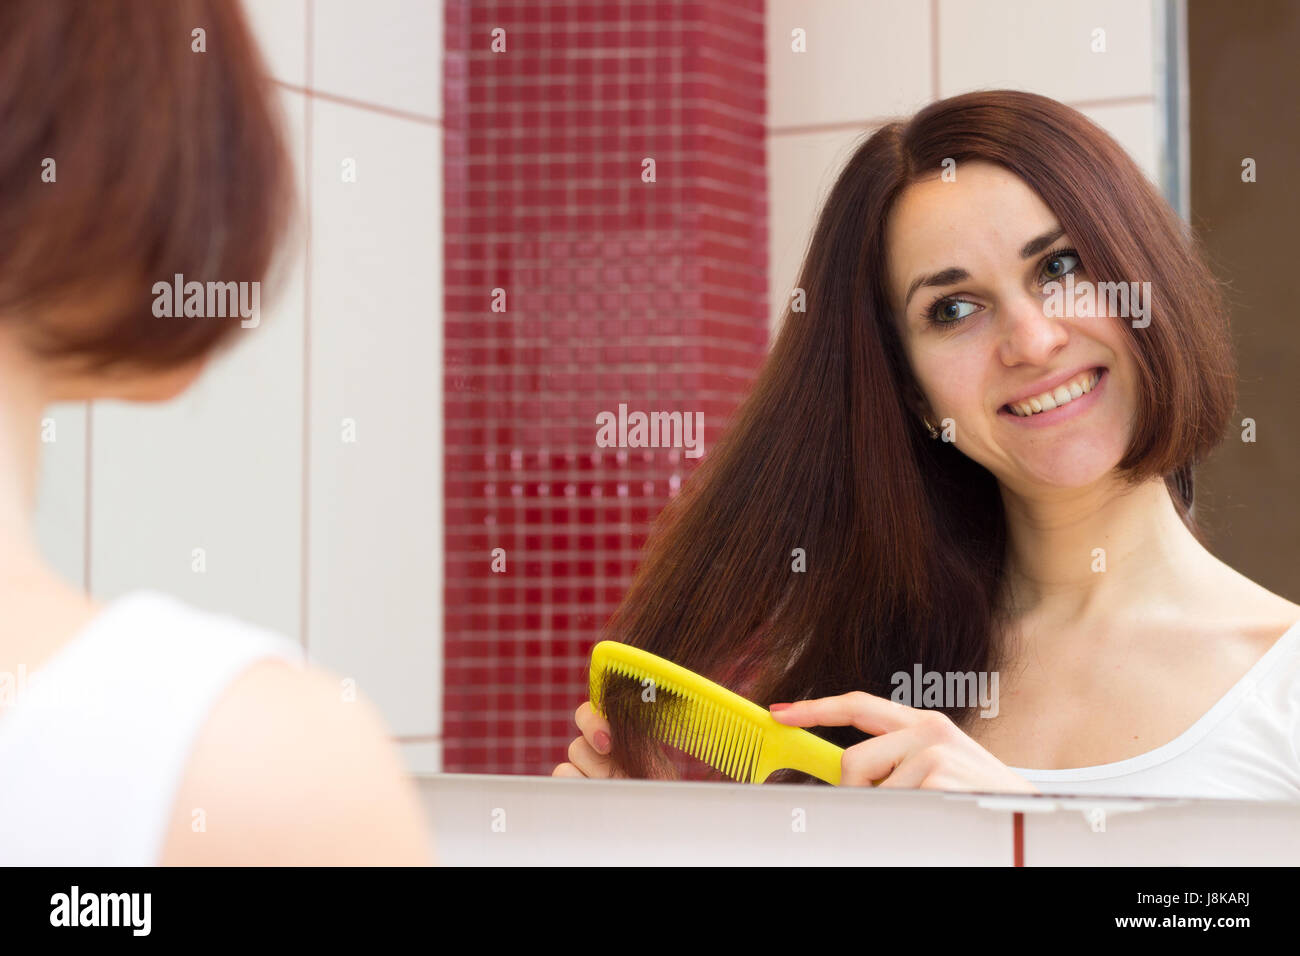 Young woman brushing her hair in bathroom Stock Photo